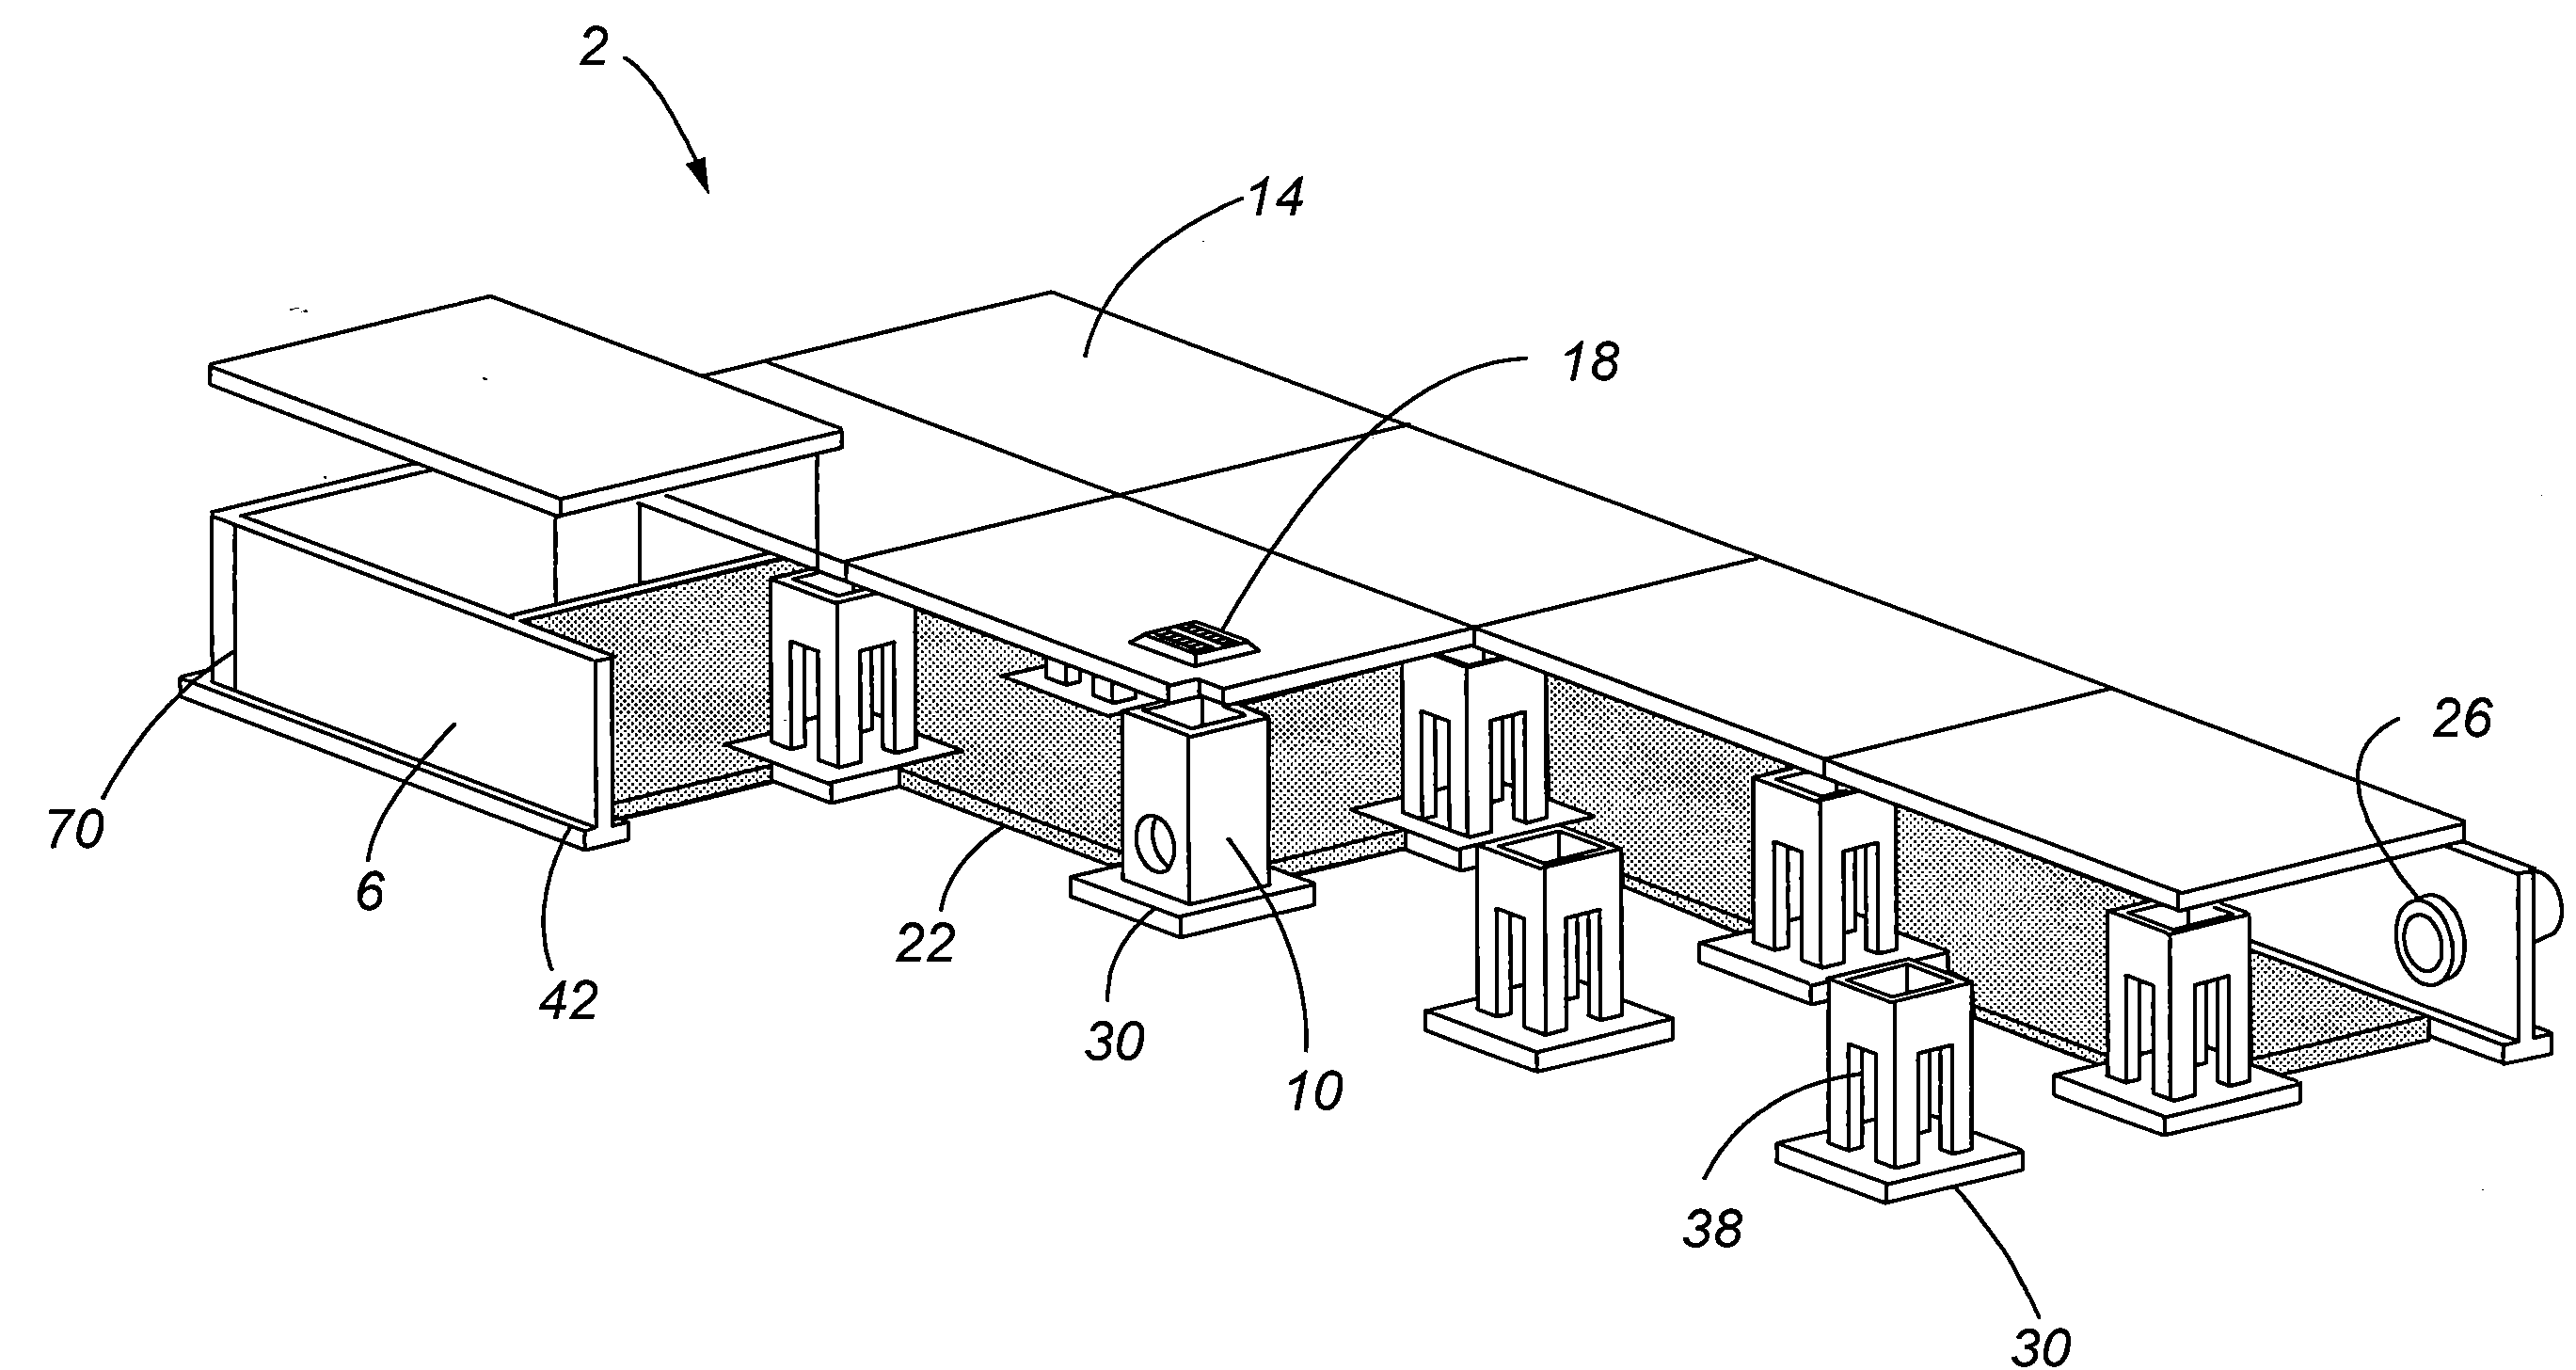 Method and Apparatus for Capturing, Storing, and Distributing Storm Water